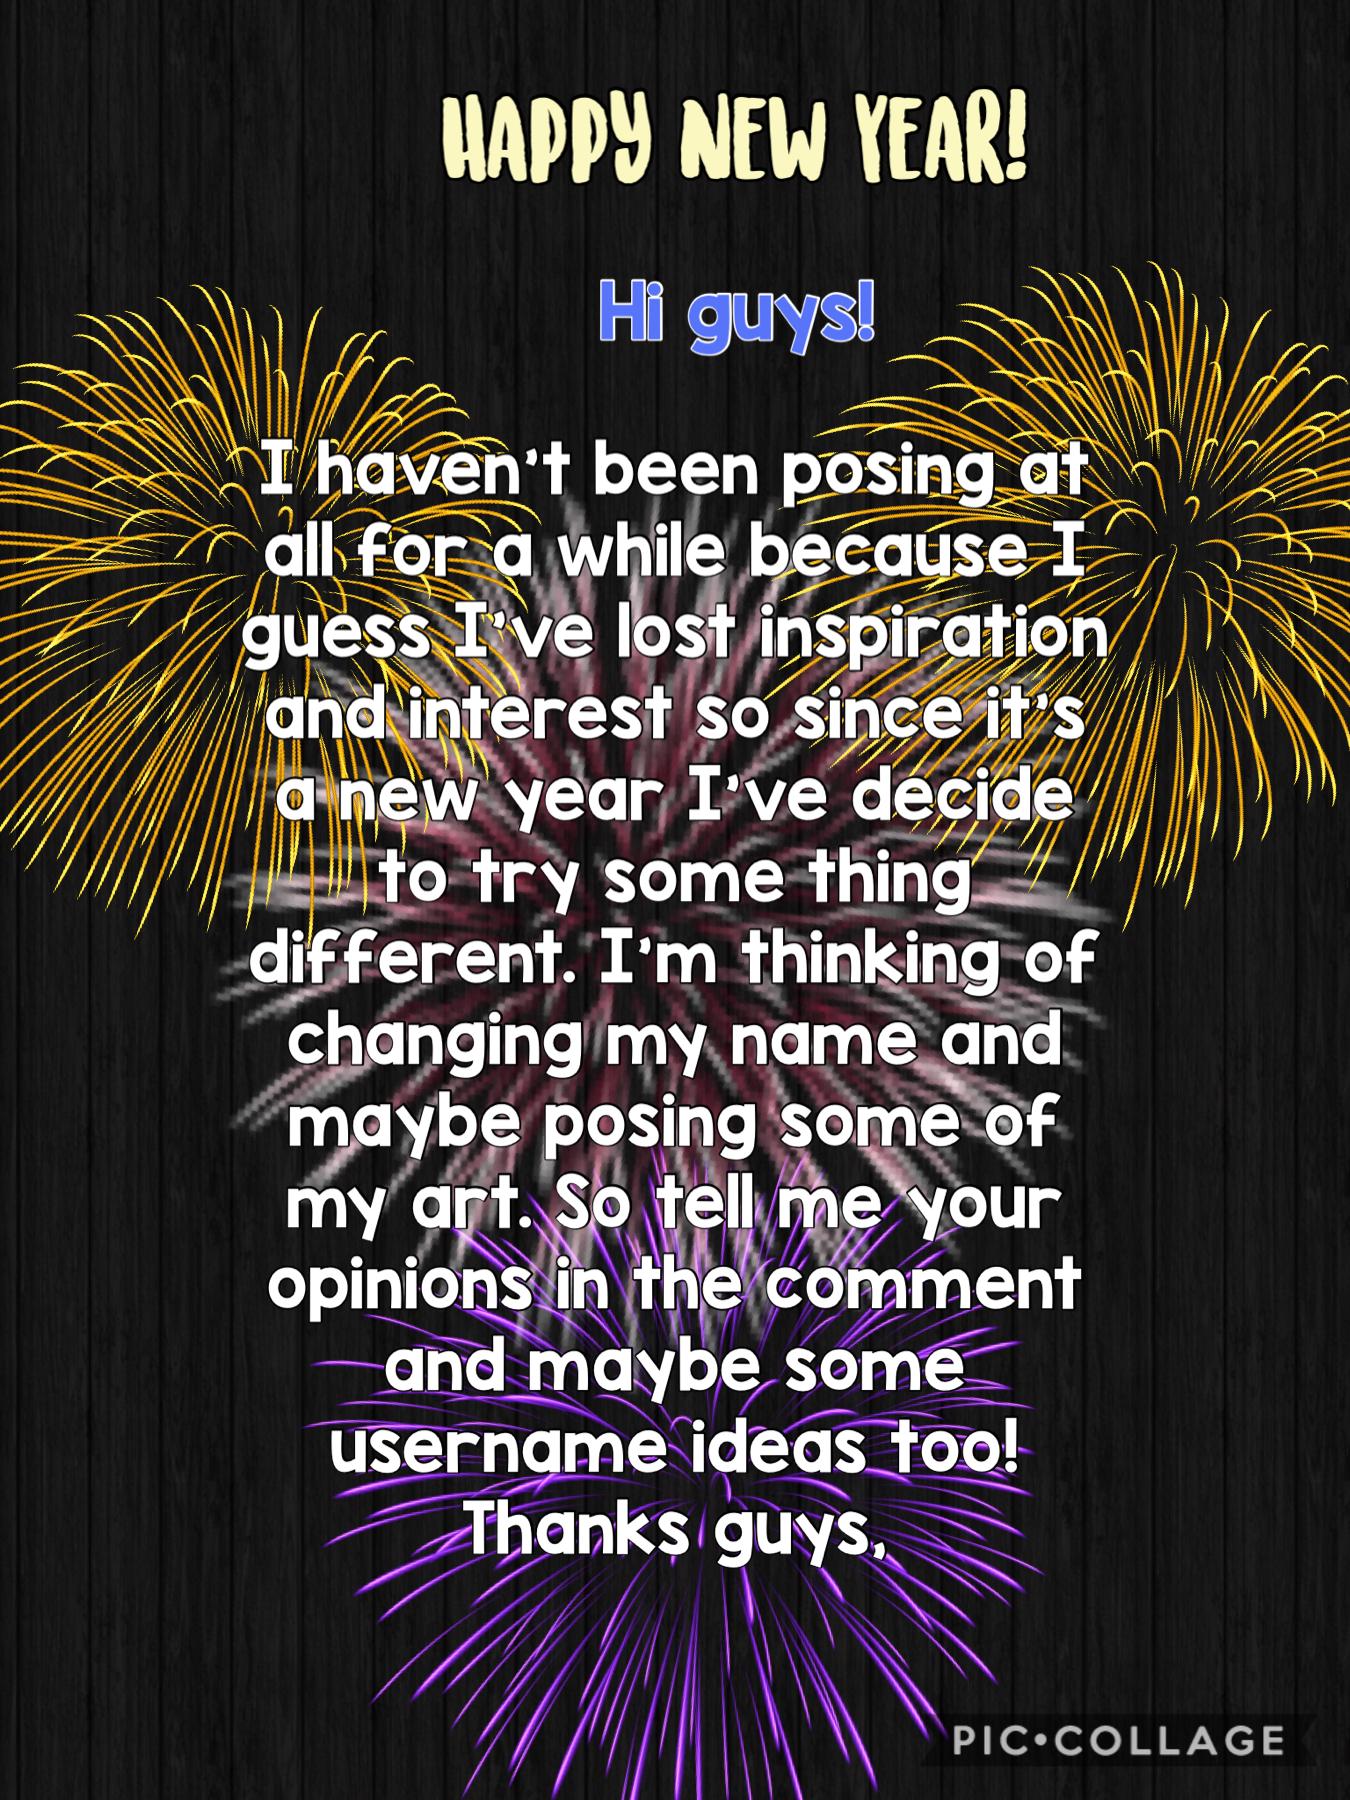 Post ideas for usernames in the comments thanks!!!